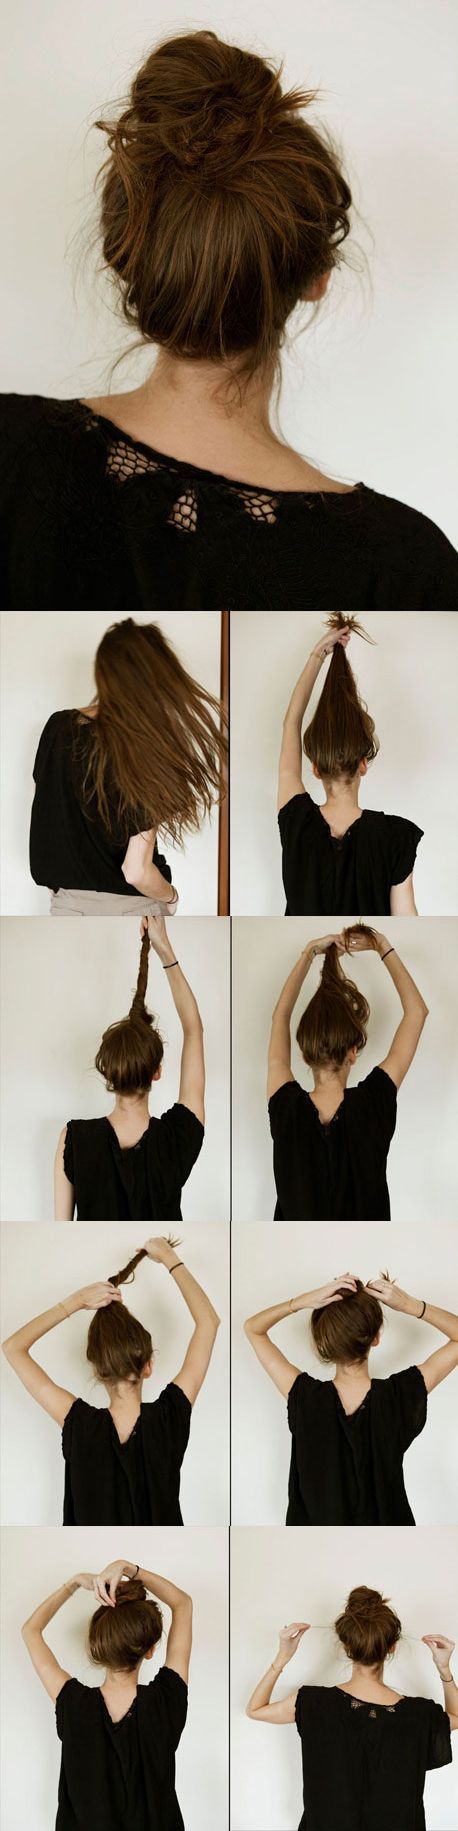 Super Easy Knotted Bun Updo and Simple Bun #Hairstyle Tutorials...